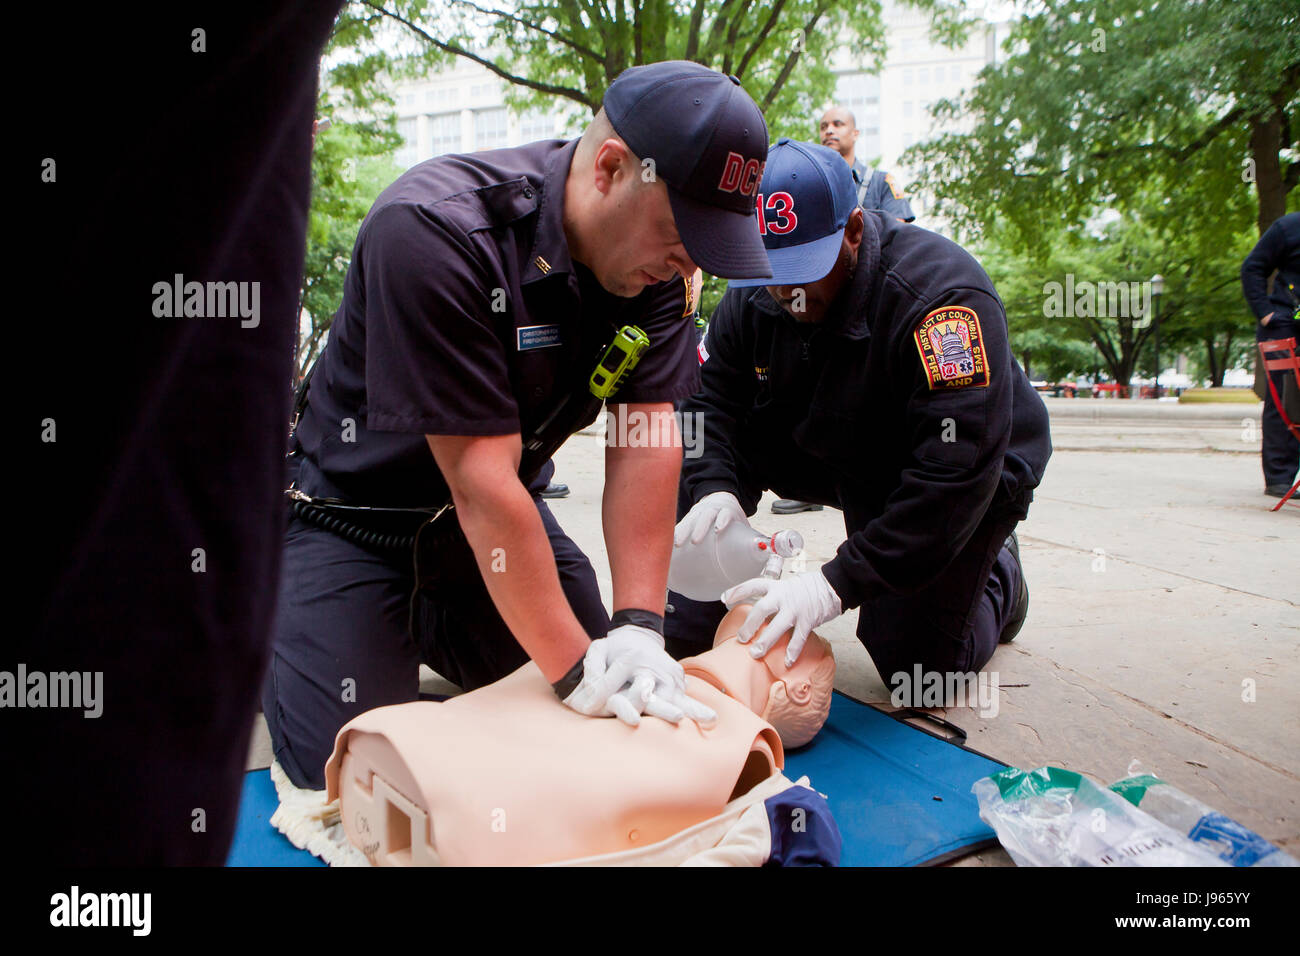 Fire and EMS technicians (EMT, Paramedic) performing CPR on CPR manikin (CPR training) - Washington, DC USA Stock Photo